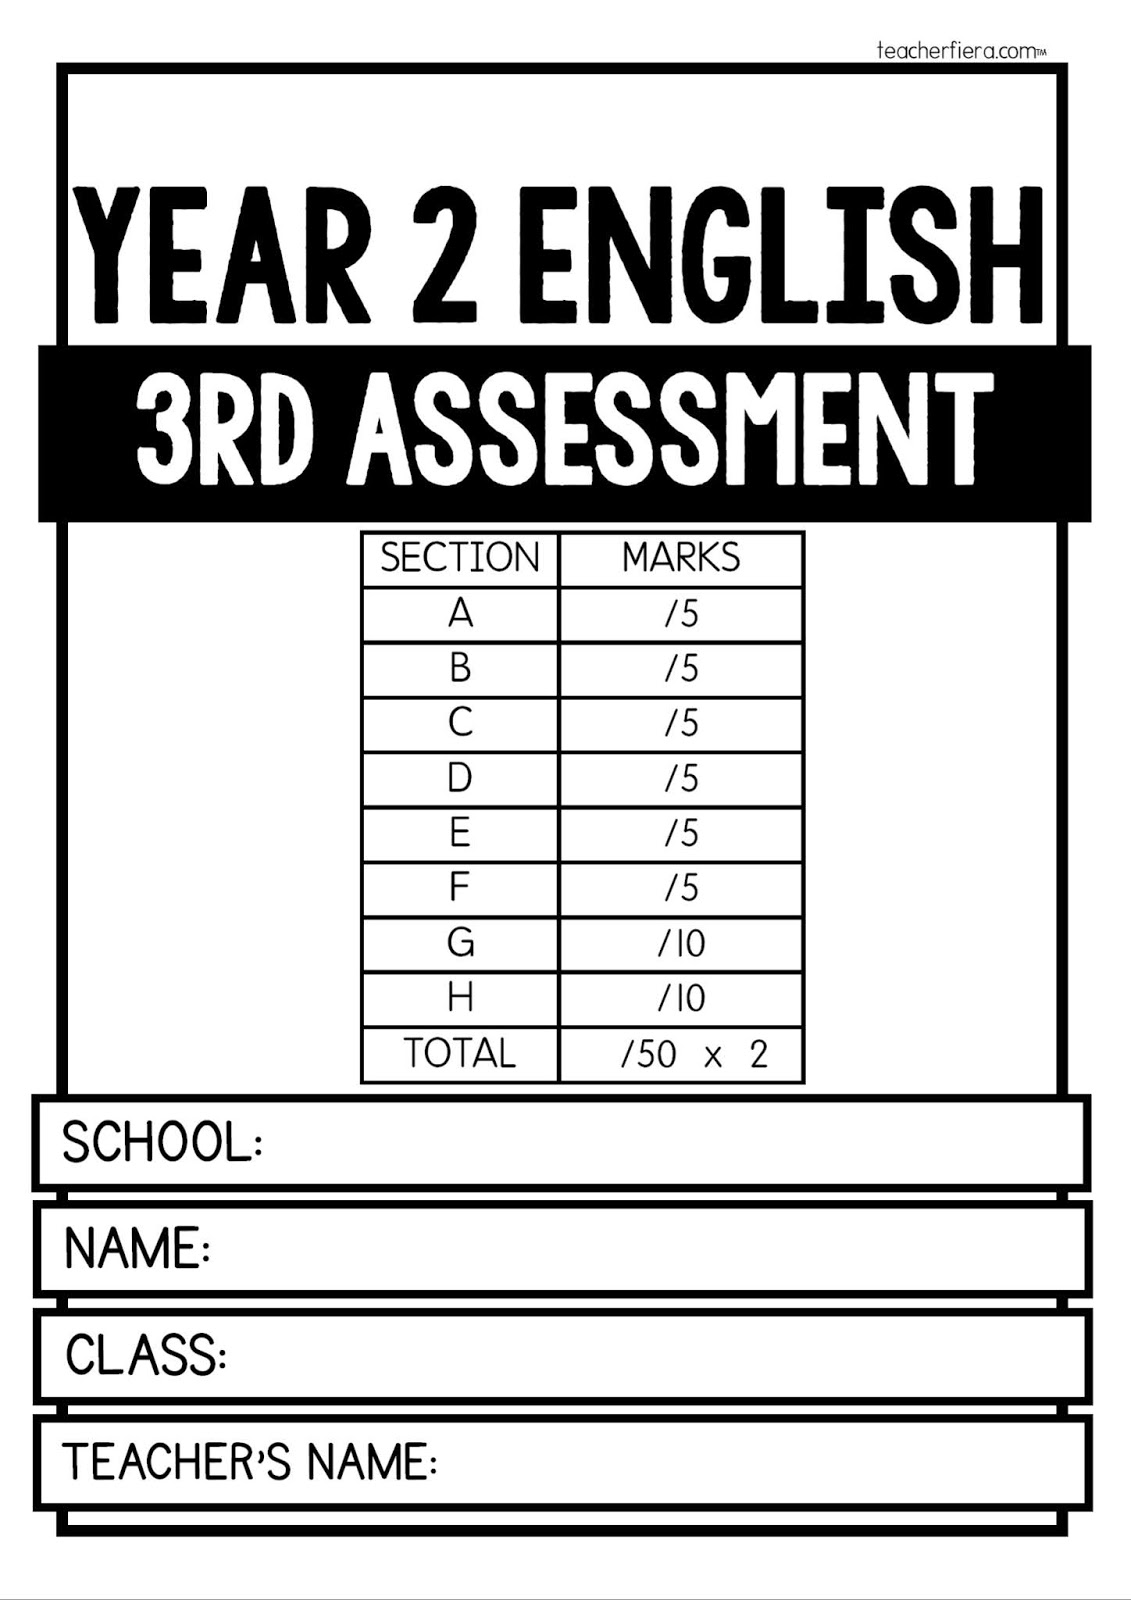 Teacherfiera EXAMPLE OF YEAR 2 ENGLISH 3RD ASSESSMENT QUESTIONS